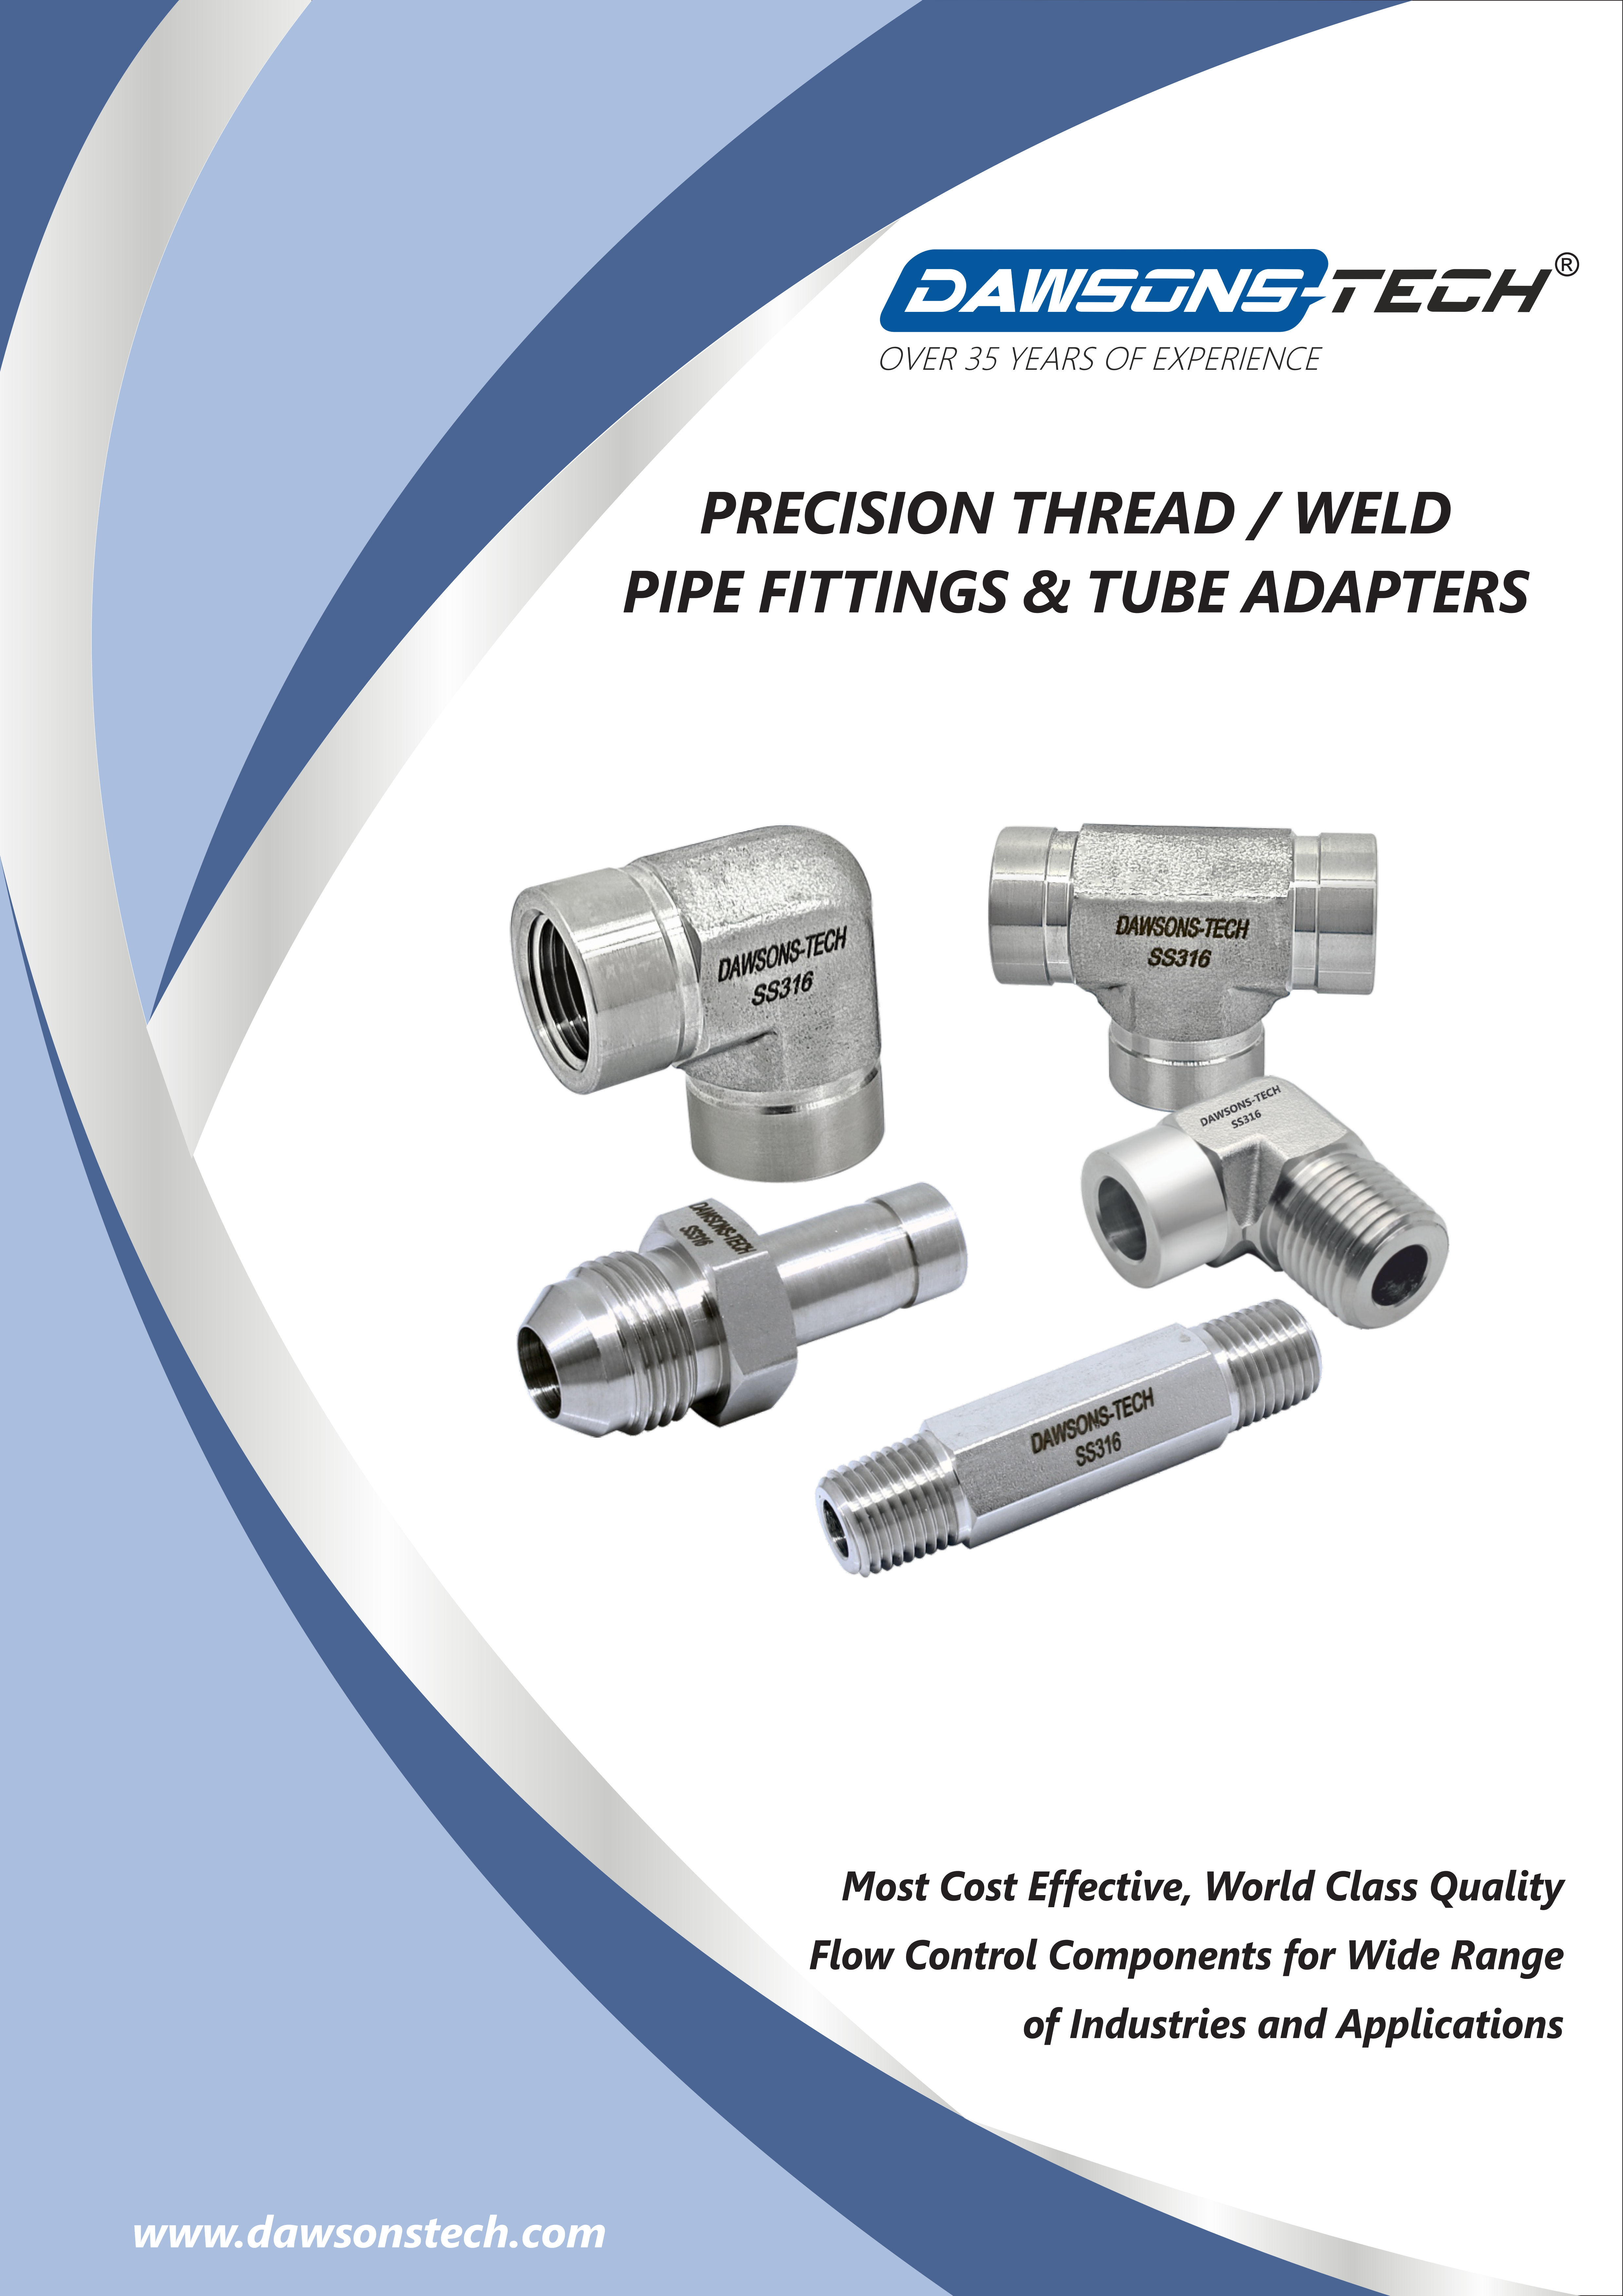 Precision Thread / Weld Pipe Fittings & Tube Adapters